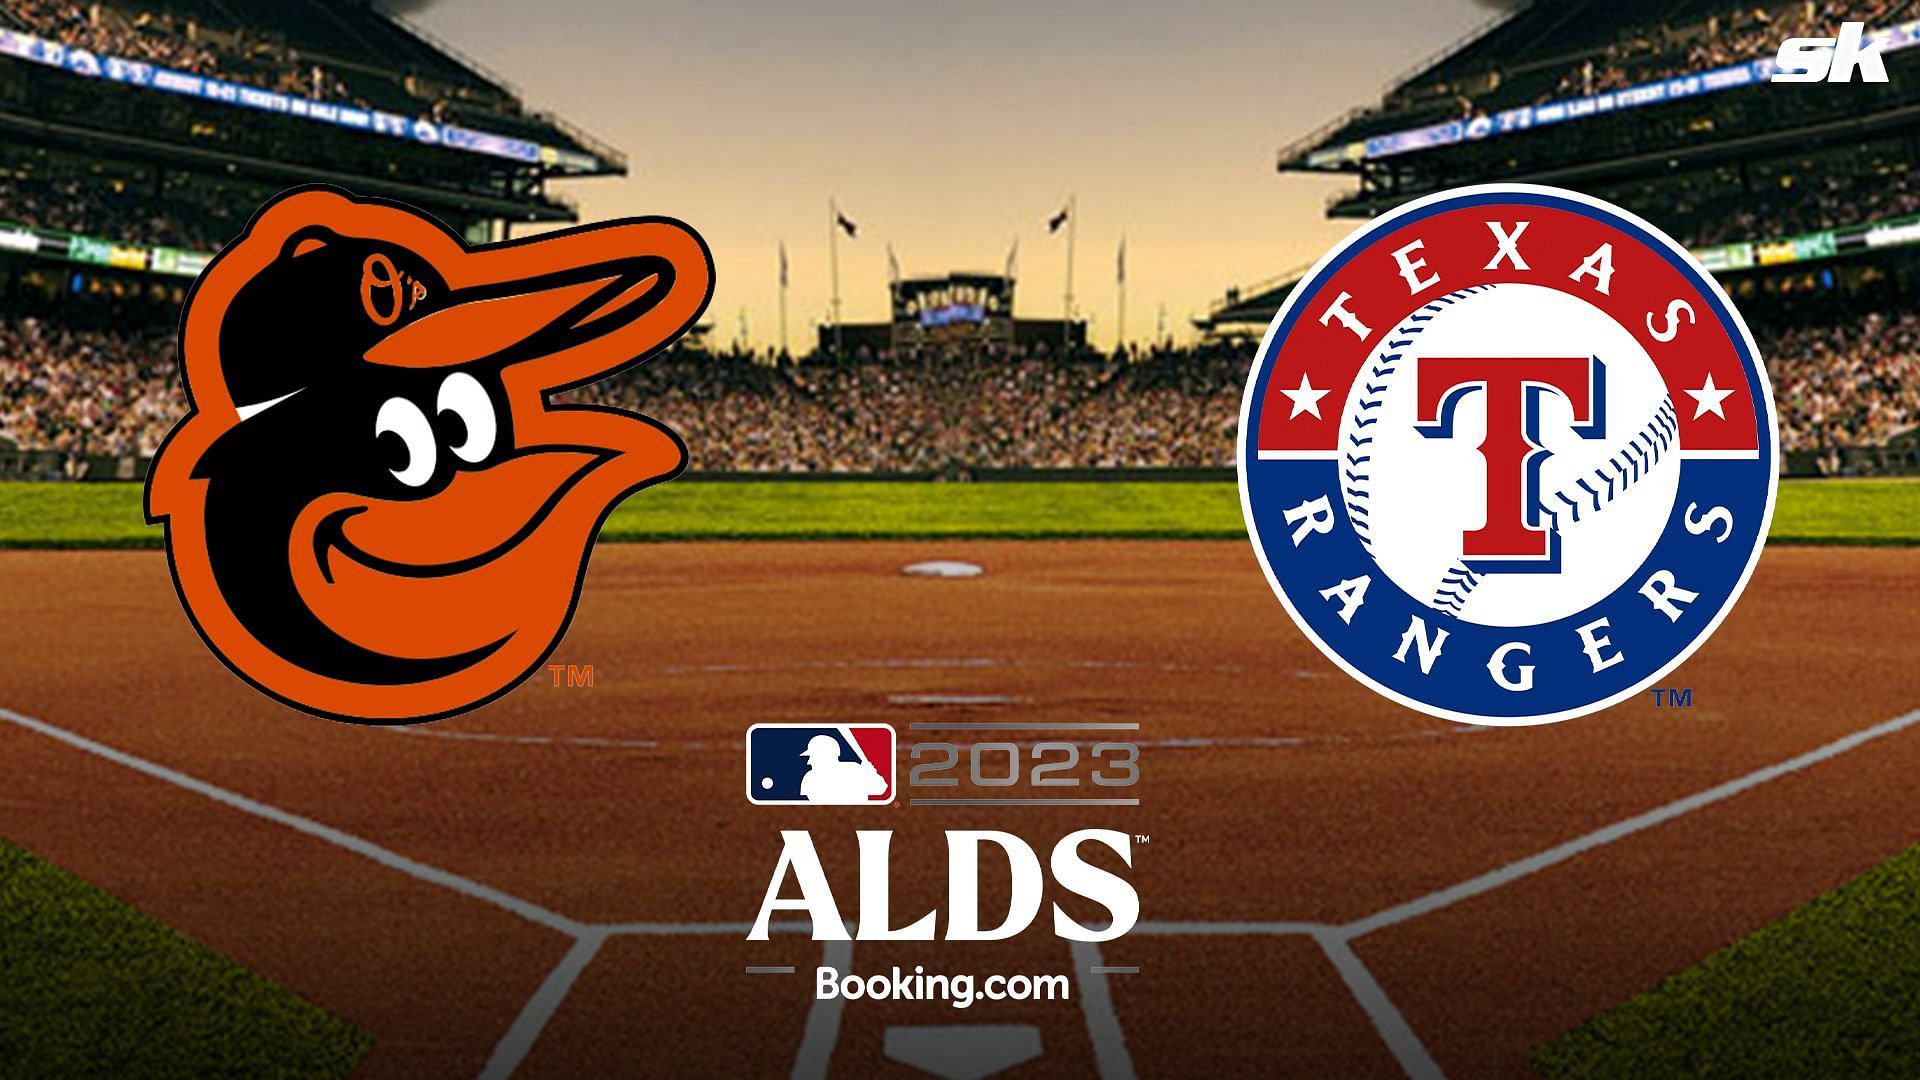 Rangers vs. Orioles prediction and betting tips 